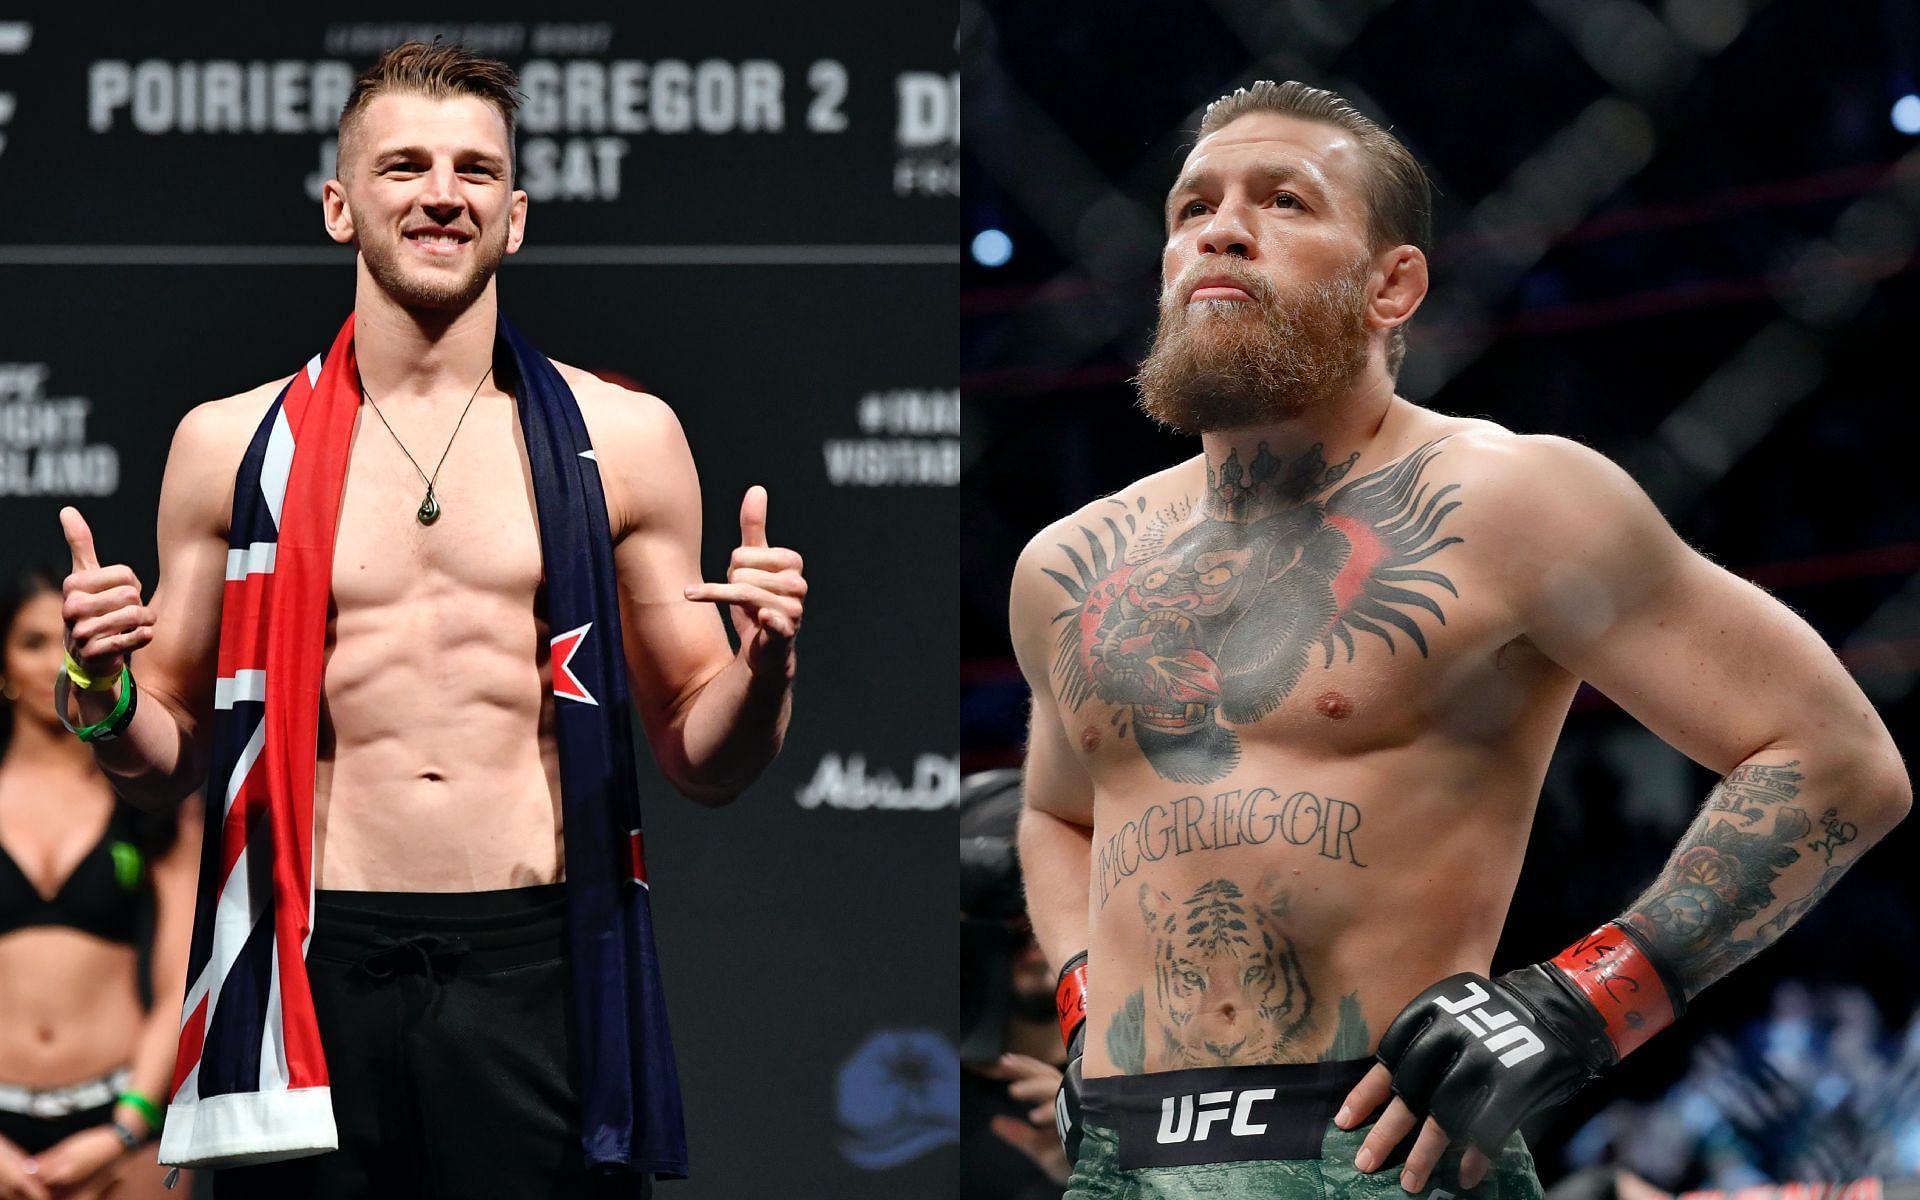 Dan Hooker and Conor McGregor [Image credits: Getty Images]